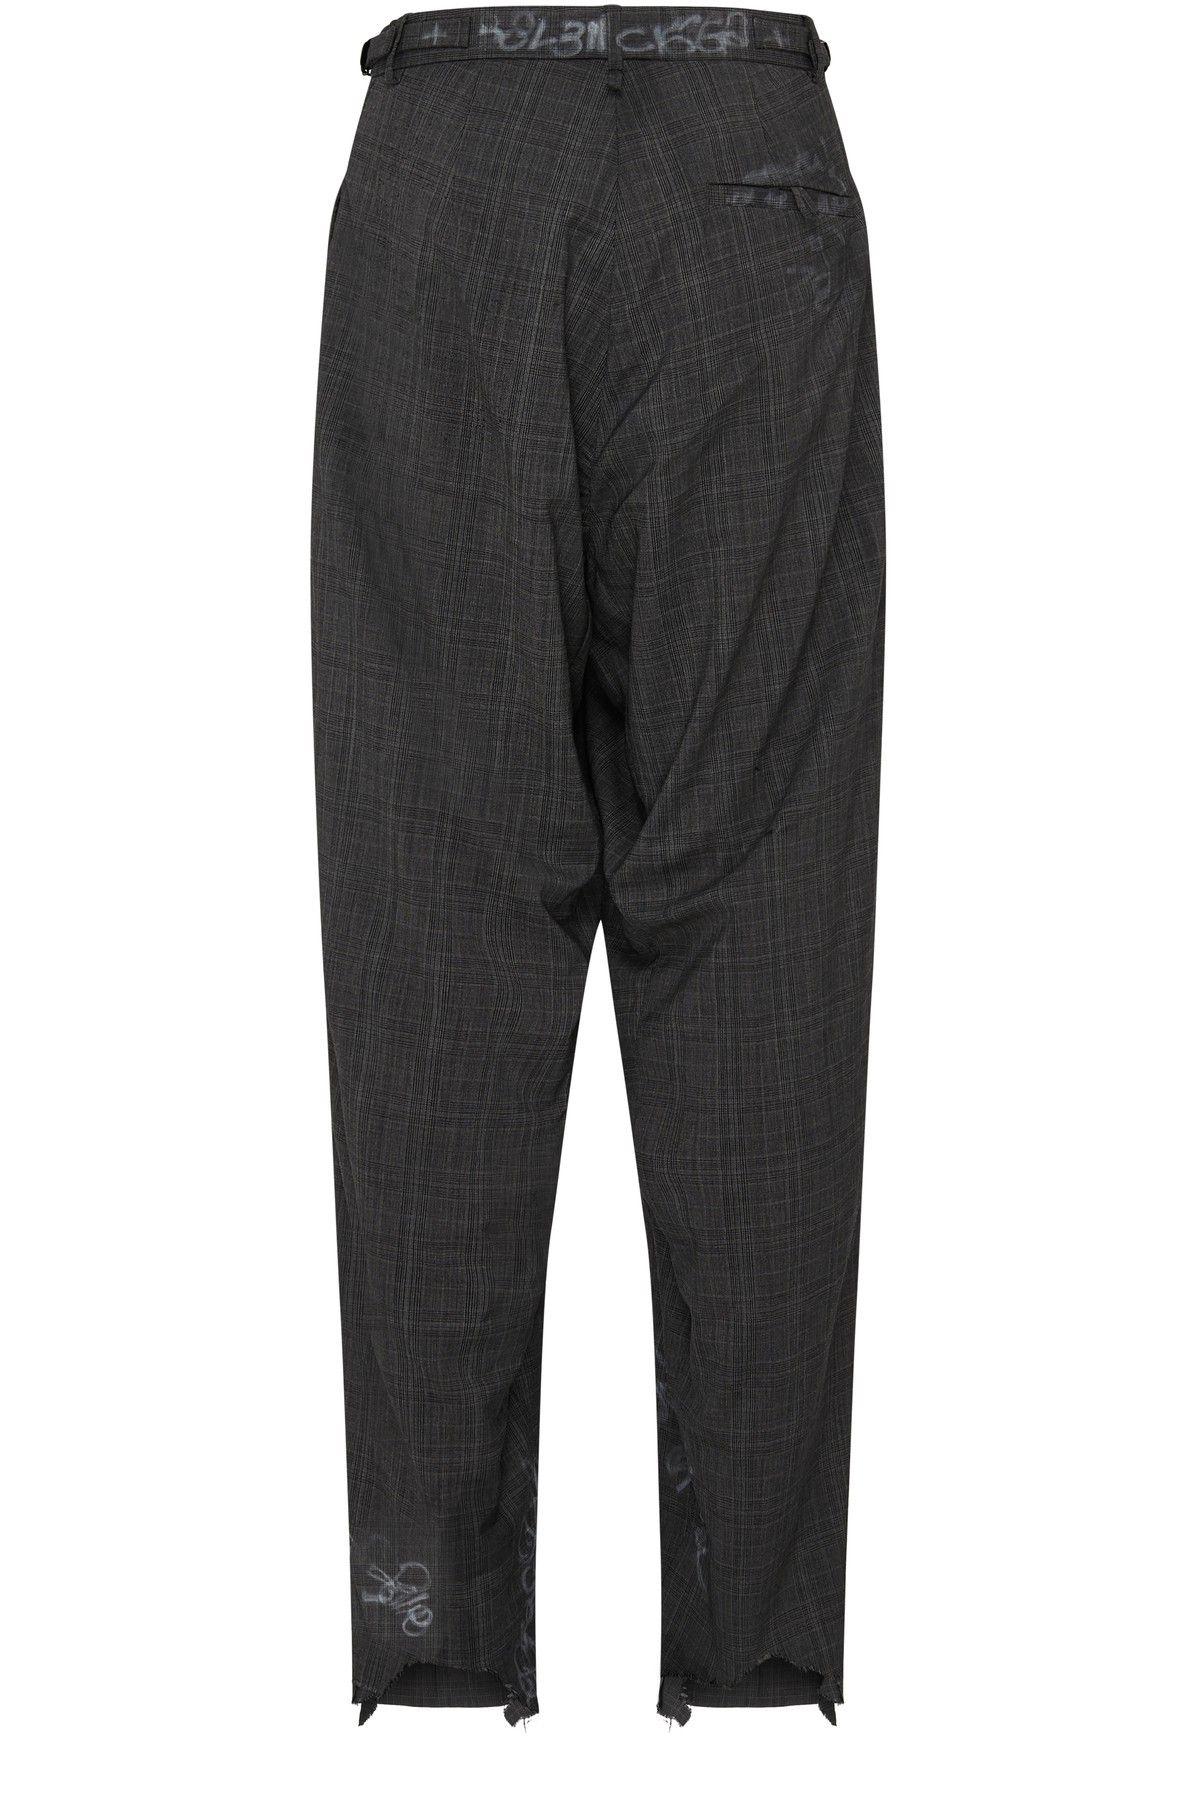 Balenciaga Tailored Pants in Black for Men | Lyst